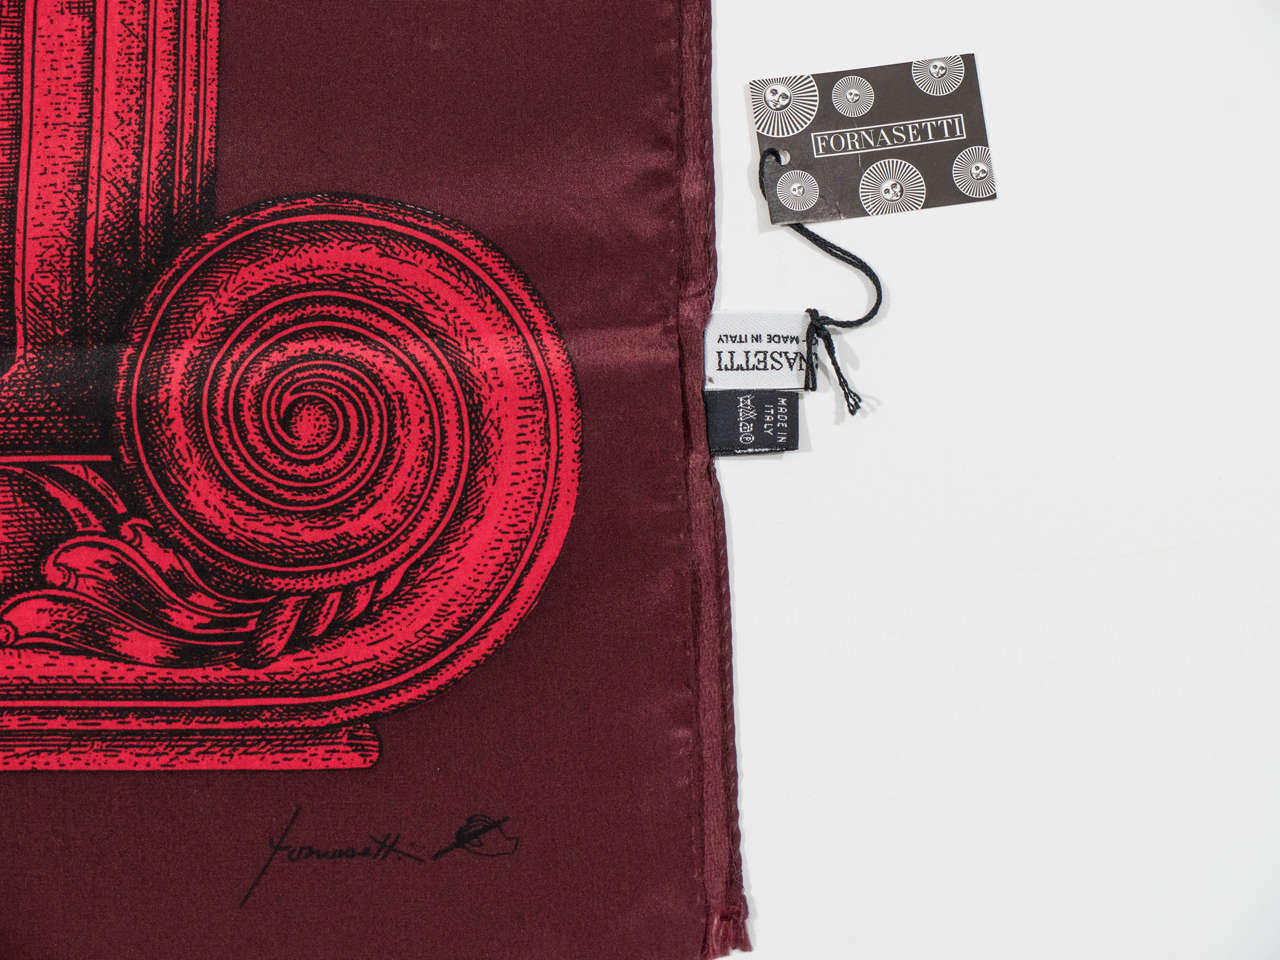 Silk Piero Fornasetti Scarf with Column Motif in Red, Burgundy and Black, Italy, 2000